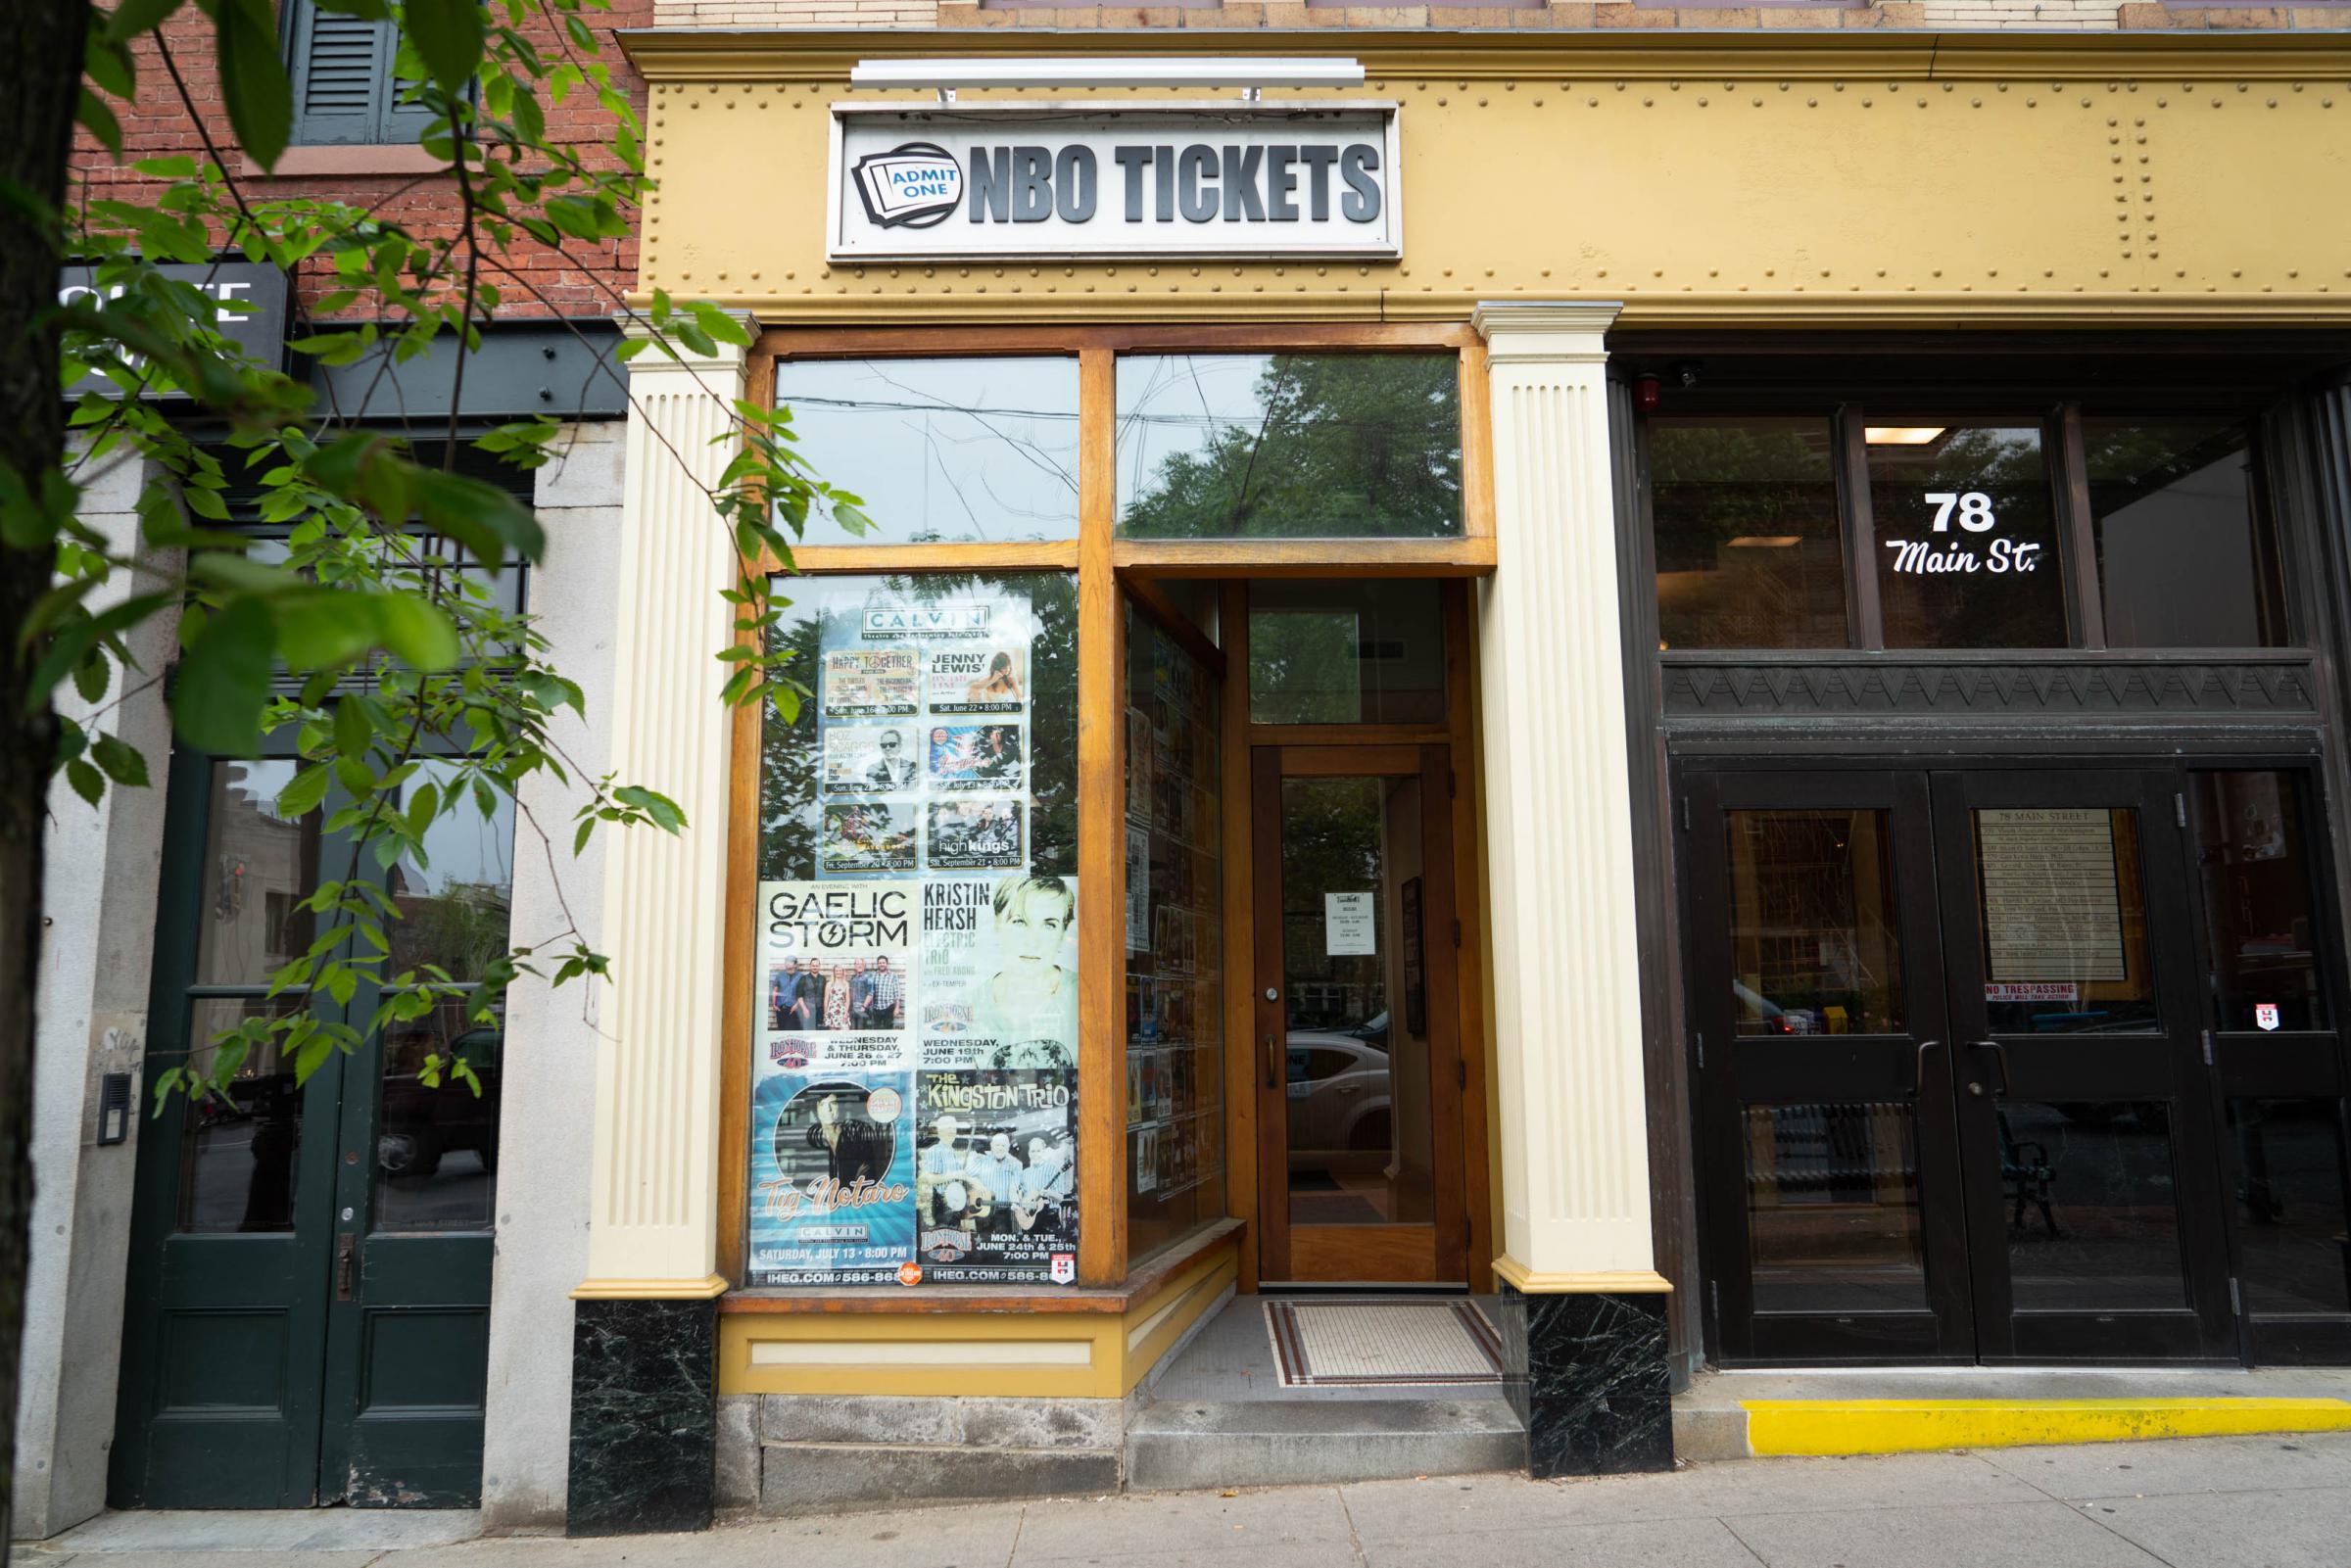 The Northampton Box Office is Iron Horse Entertainment Group's ticketing headquarters. It's just off the main intersection in downtown Northampton, Massachusetts. Photo by Ellery Berenger for NEPR